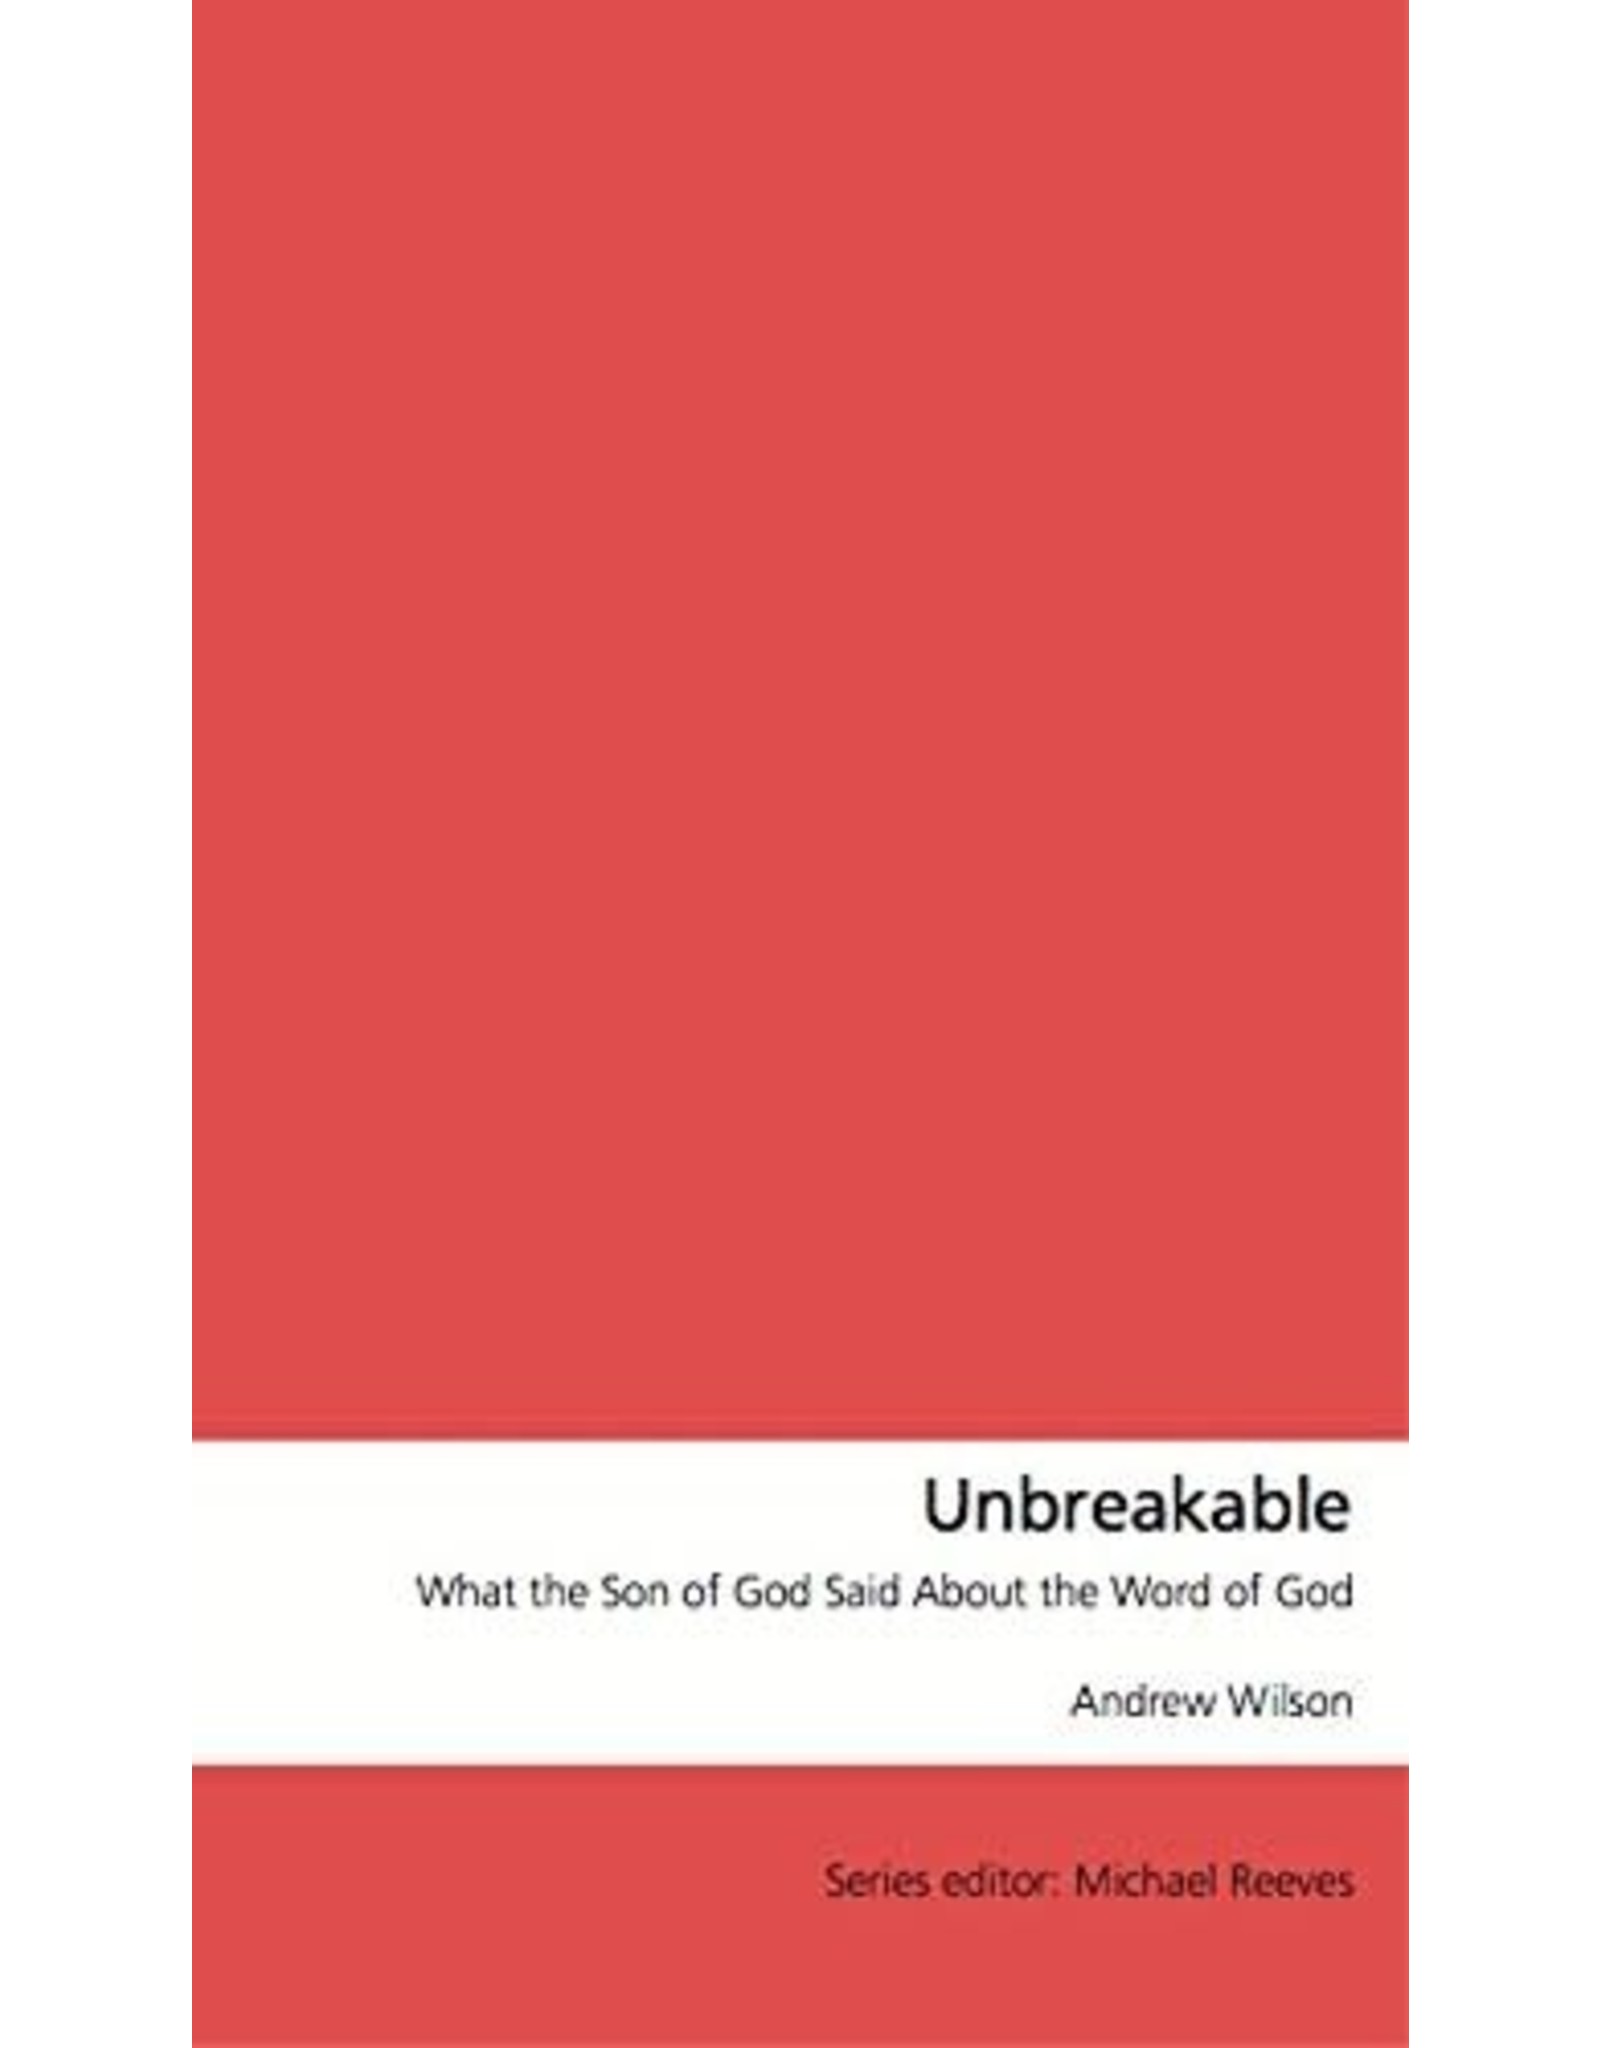 10ofThose / 10 Publishing Unbreakable: What the Son of God Said About the Word of God